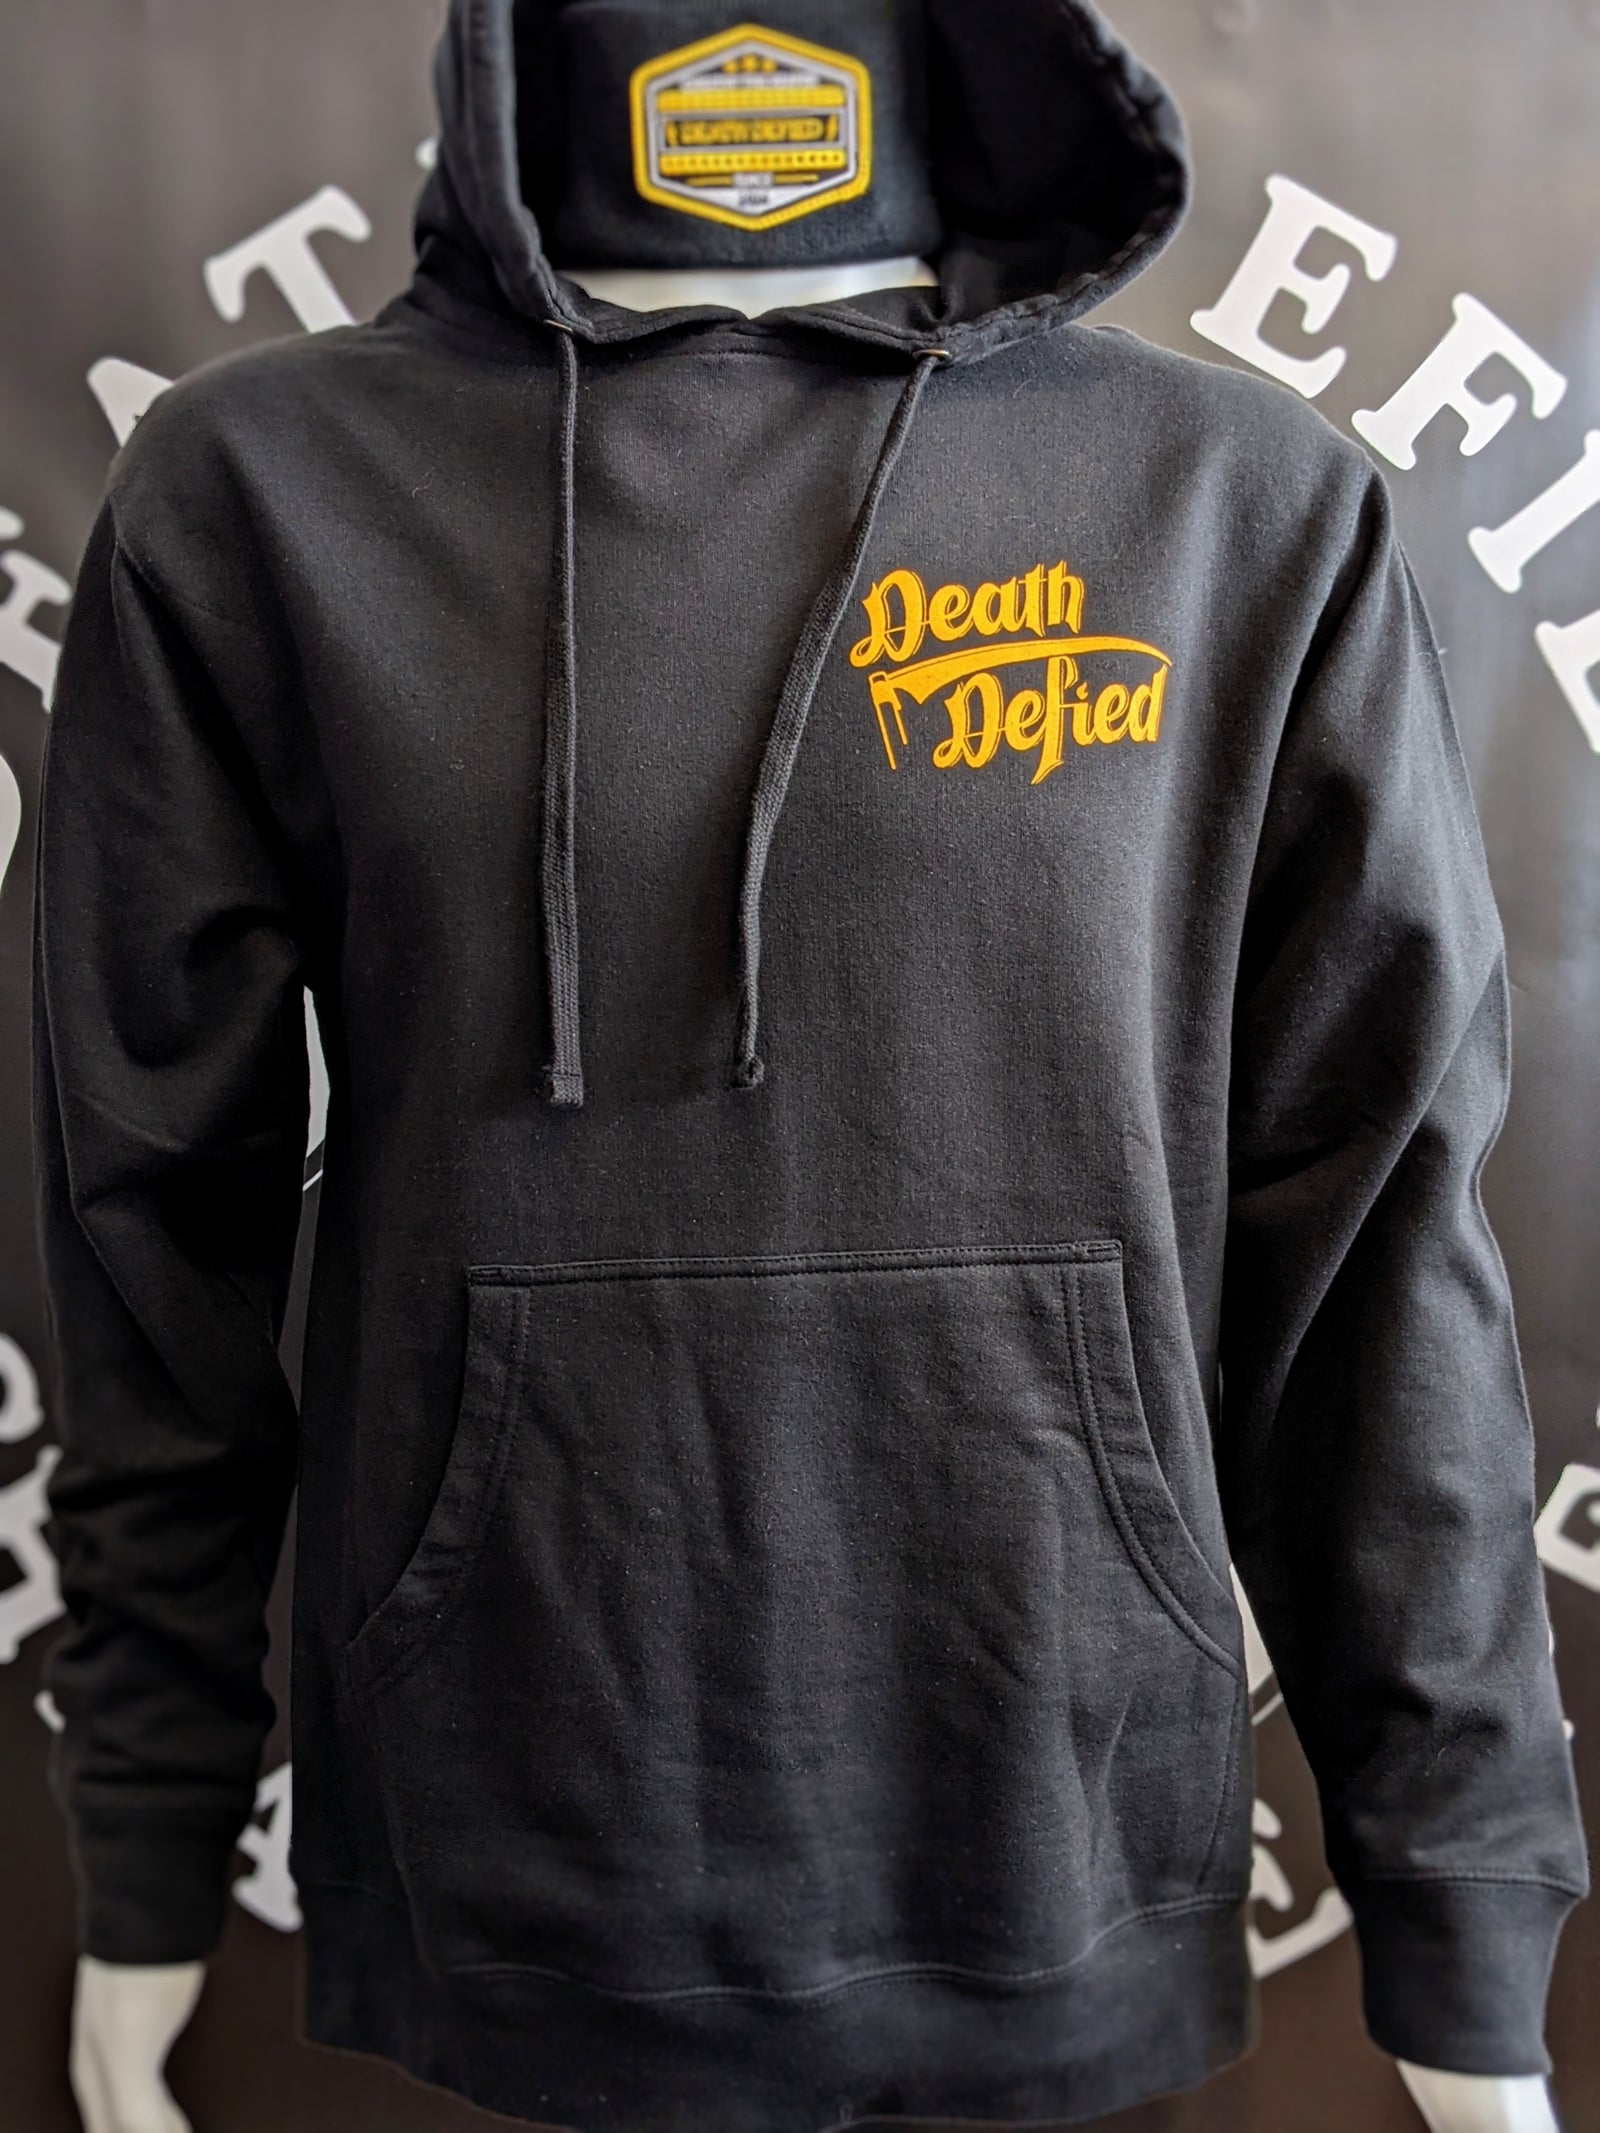 Yellow on black OG pullover hoodie